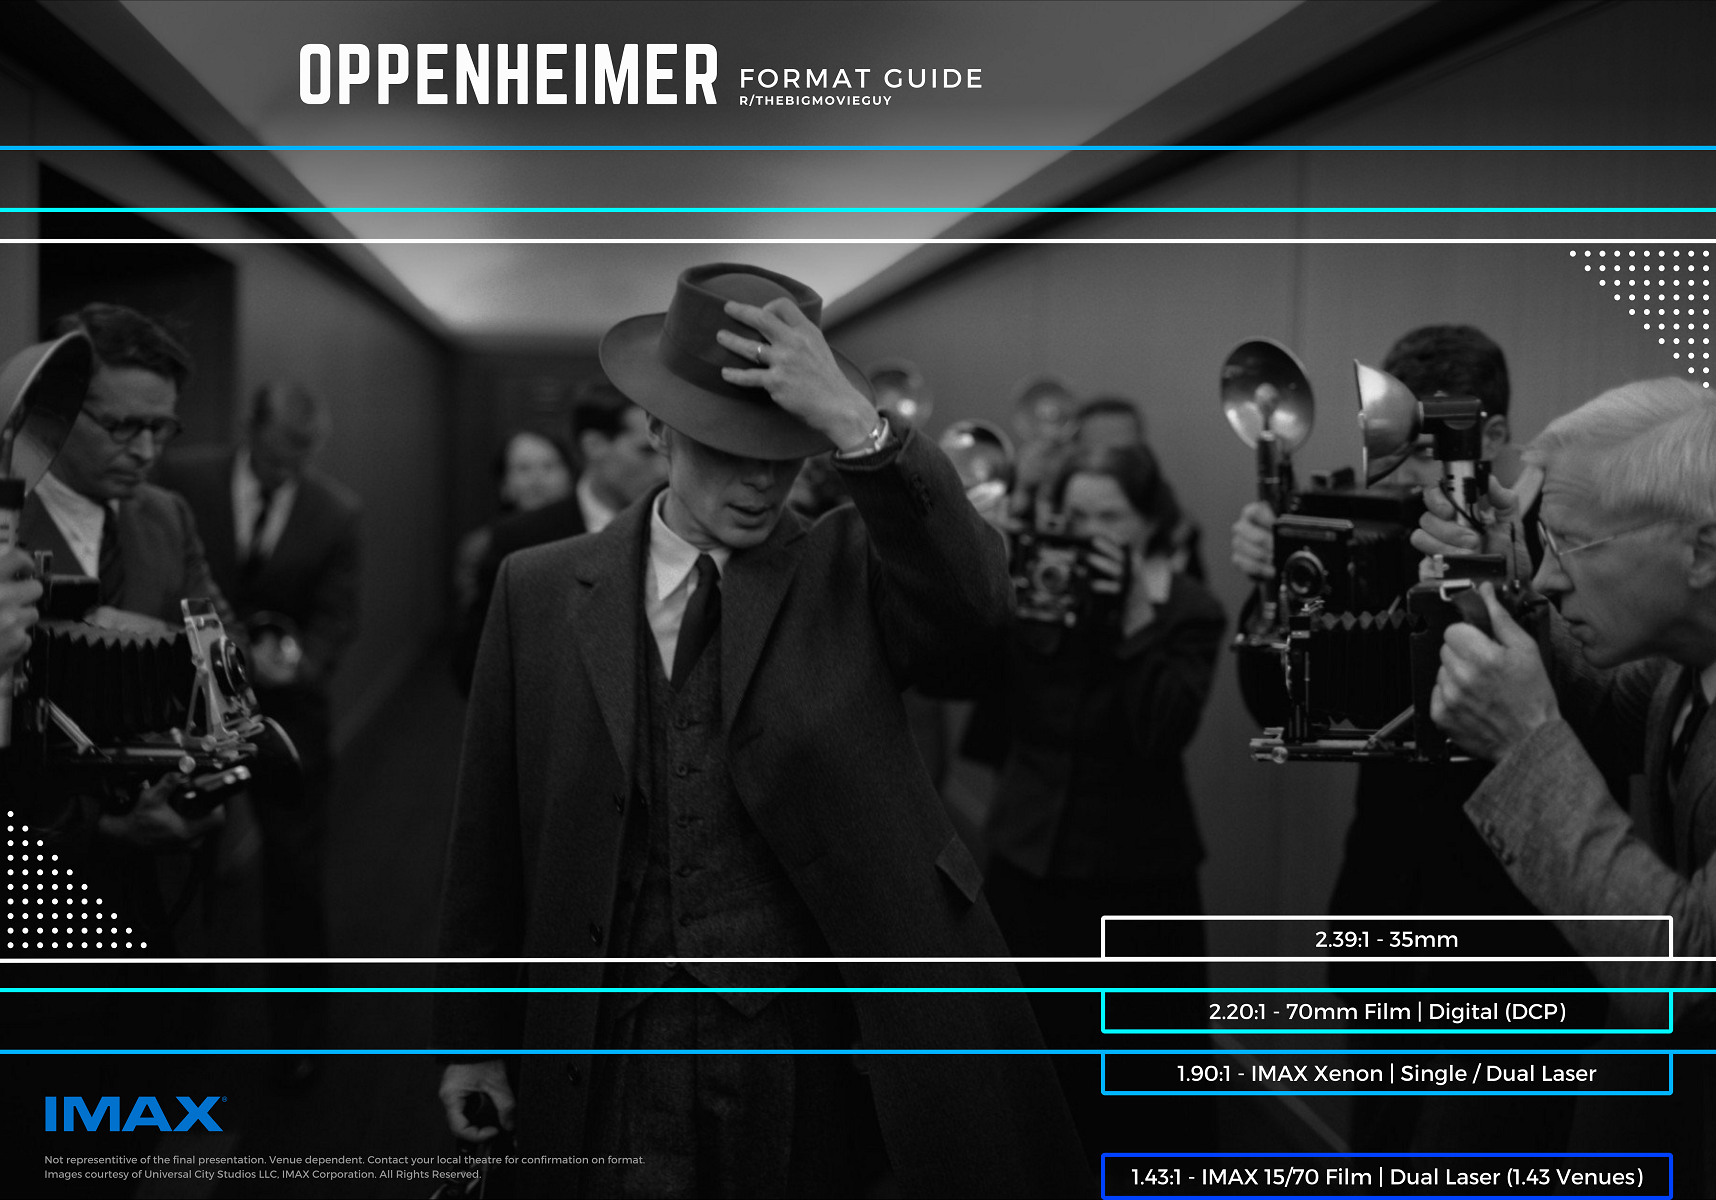 How to Watch 'Oppenheimer' Online Streaming, Digital Release